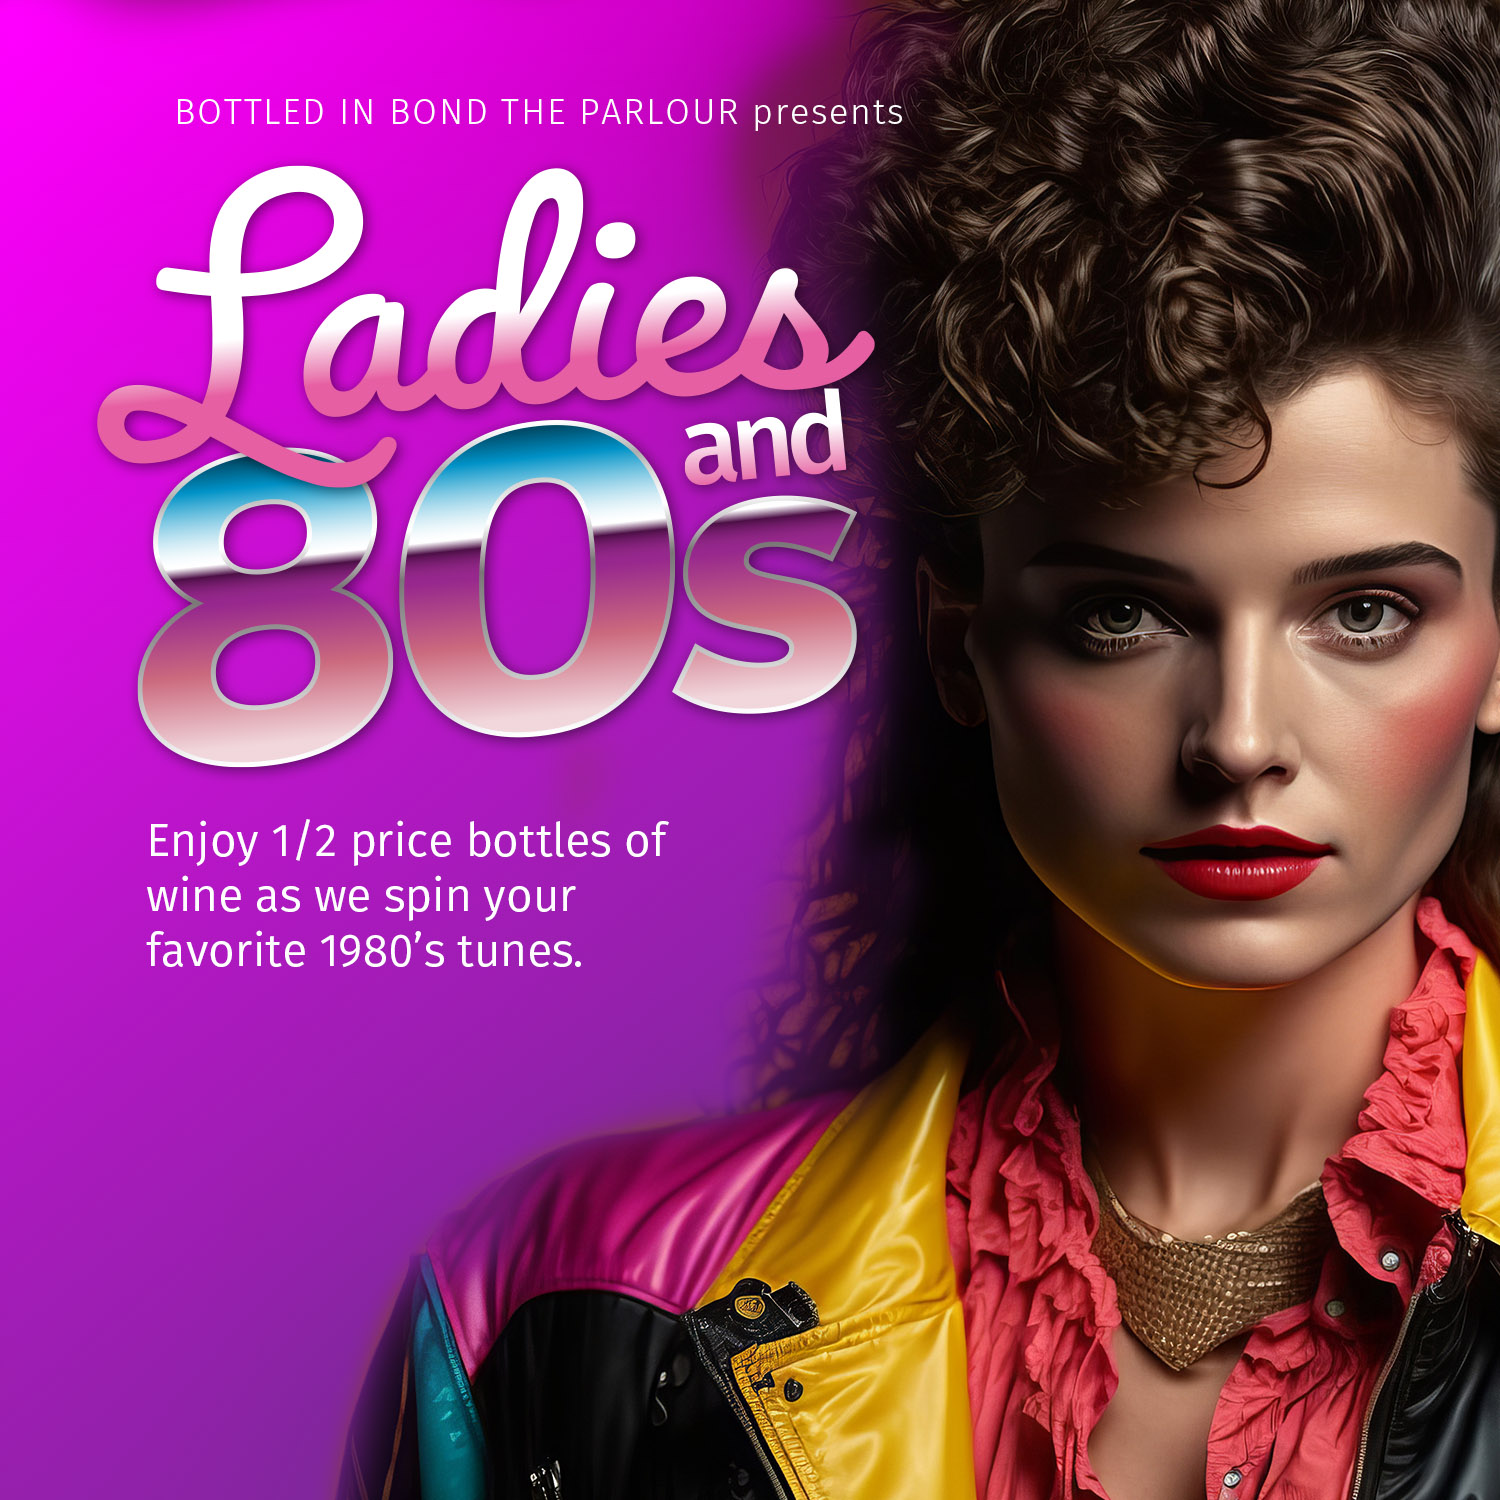 Ladies and 80s Wednesday event at Bottled in Bond The Parlour in Frisco, Texas featuring 1/2 ogf bottles of wine all night long. Image shows brunette dressed in 80s fashion and makeup.